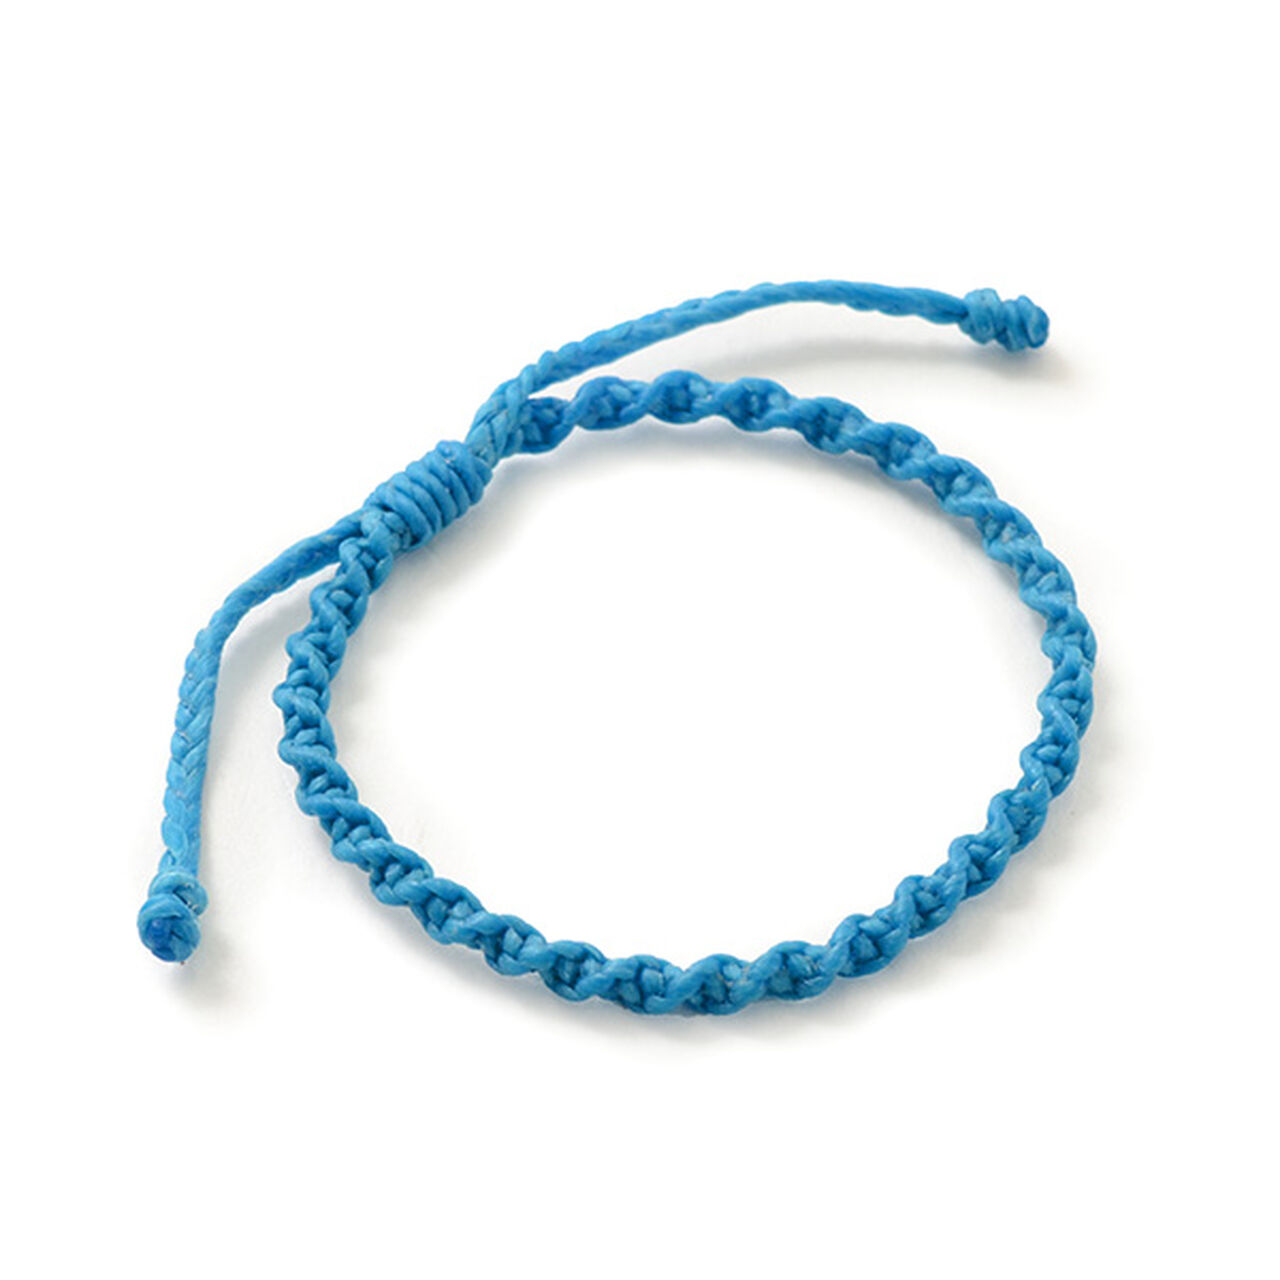 Necklace - Waxed Cotton Cord - Light Blue